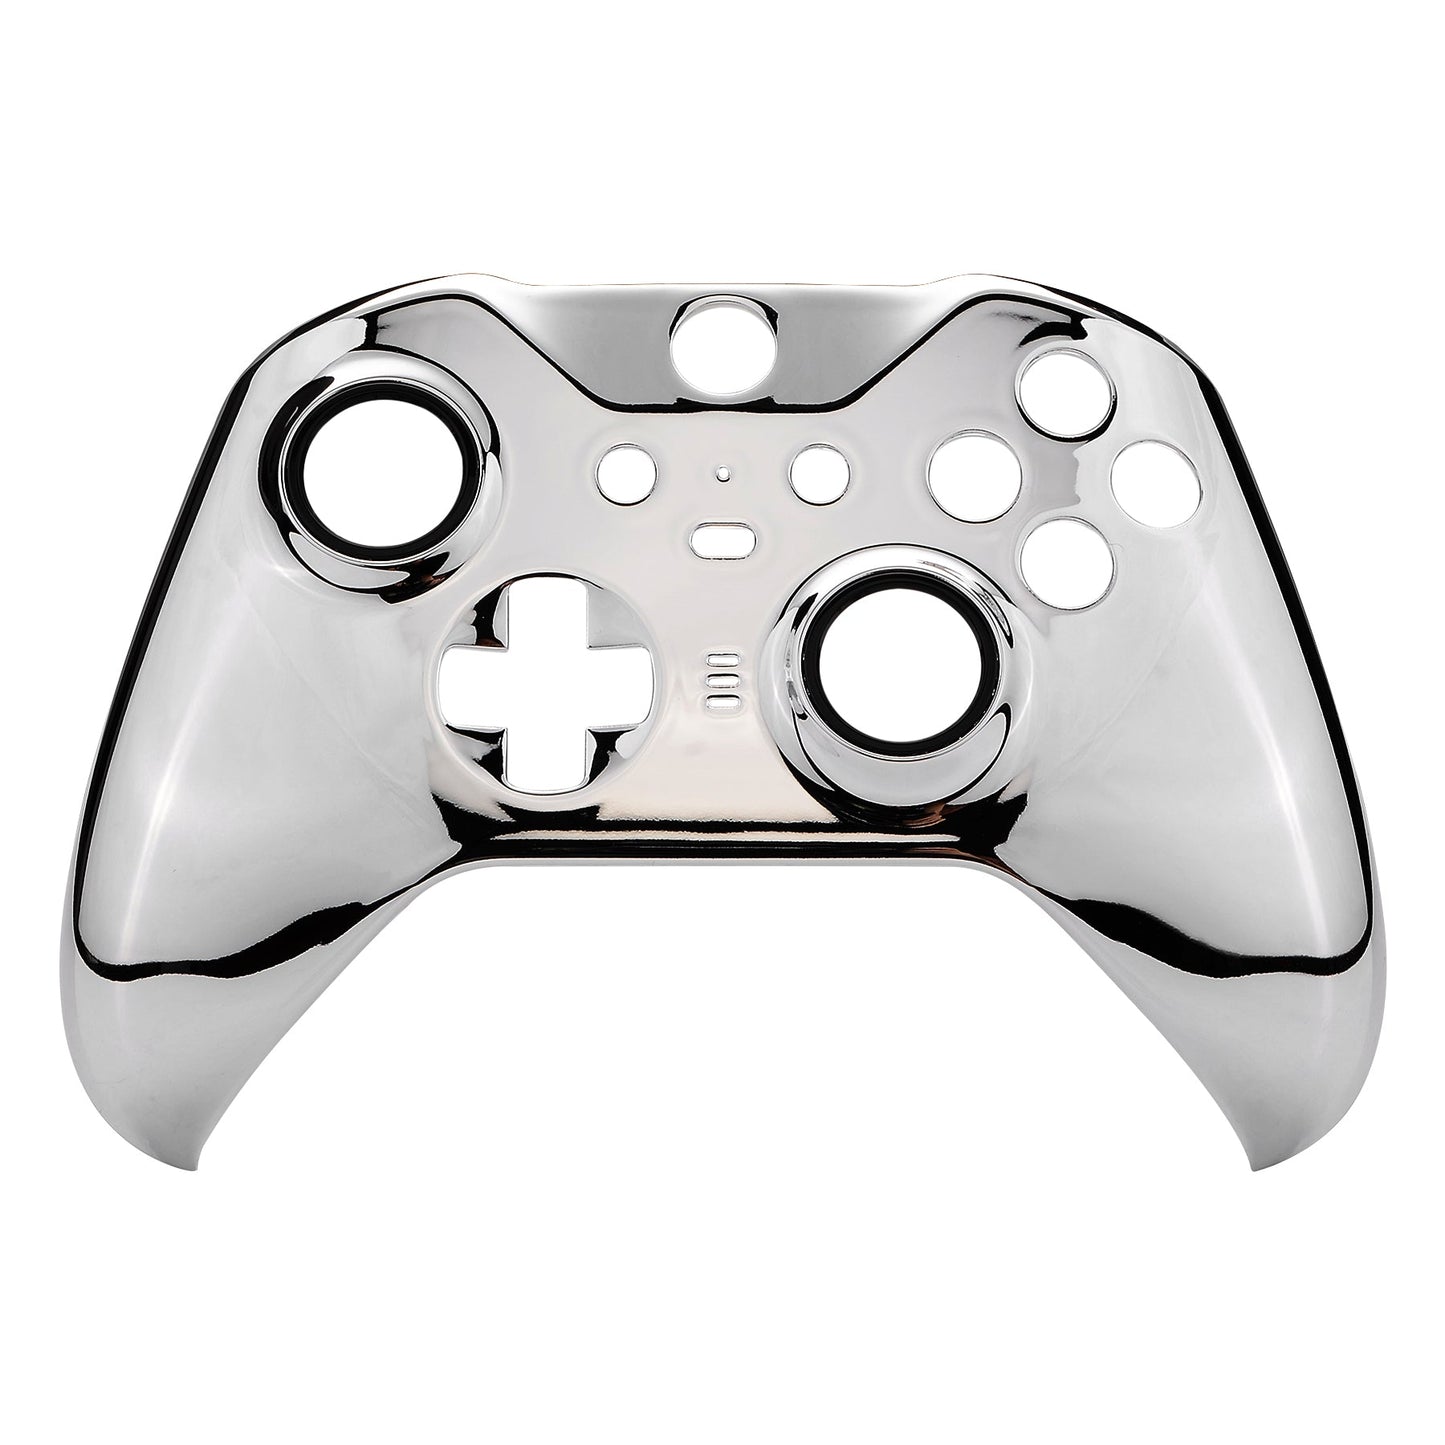 eXtremeRate Retail Chrome Silver Edition Glossy Faceplate Cover, Front Housing Shell Case Replacement Kit for Xbox One Elite Series 2 Controller (Model 1797 and Core Model 1797) - Thumbstick Accent Rings Included - ELD402